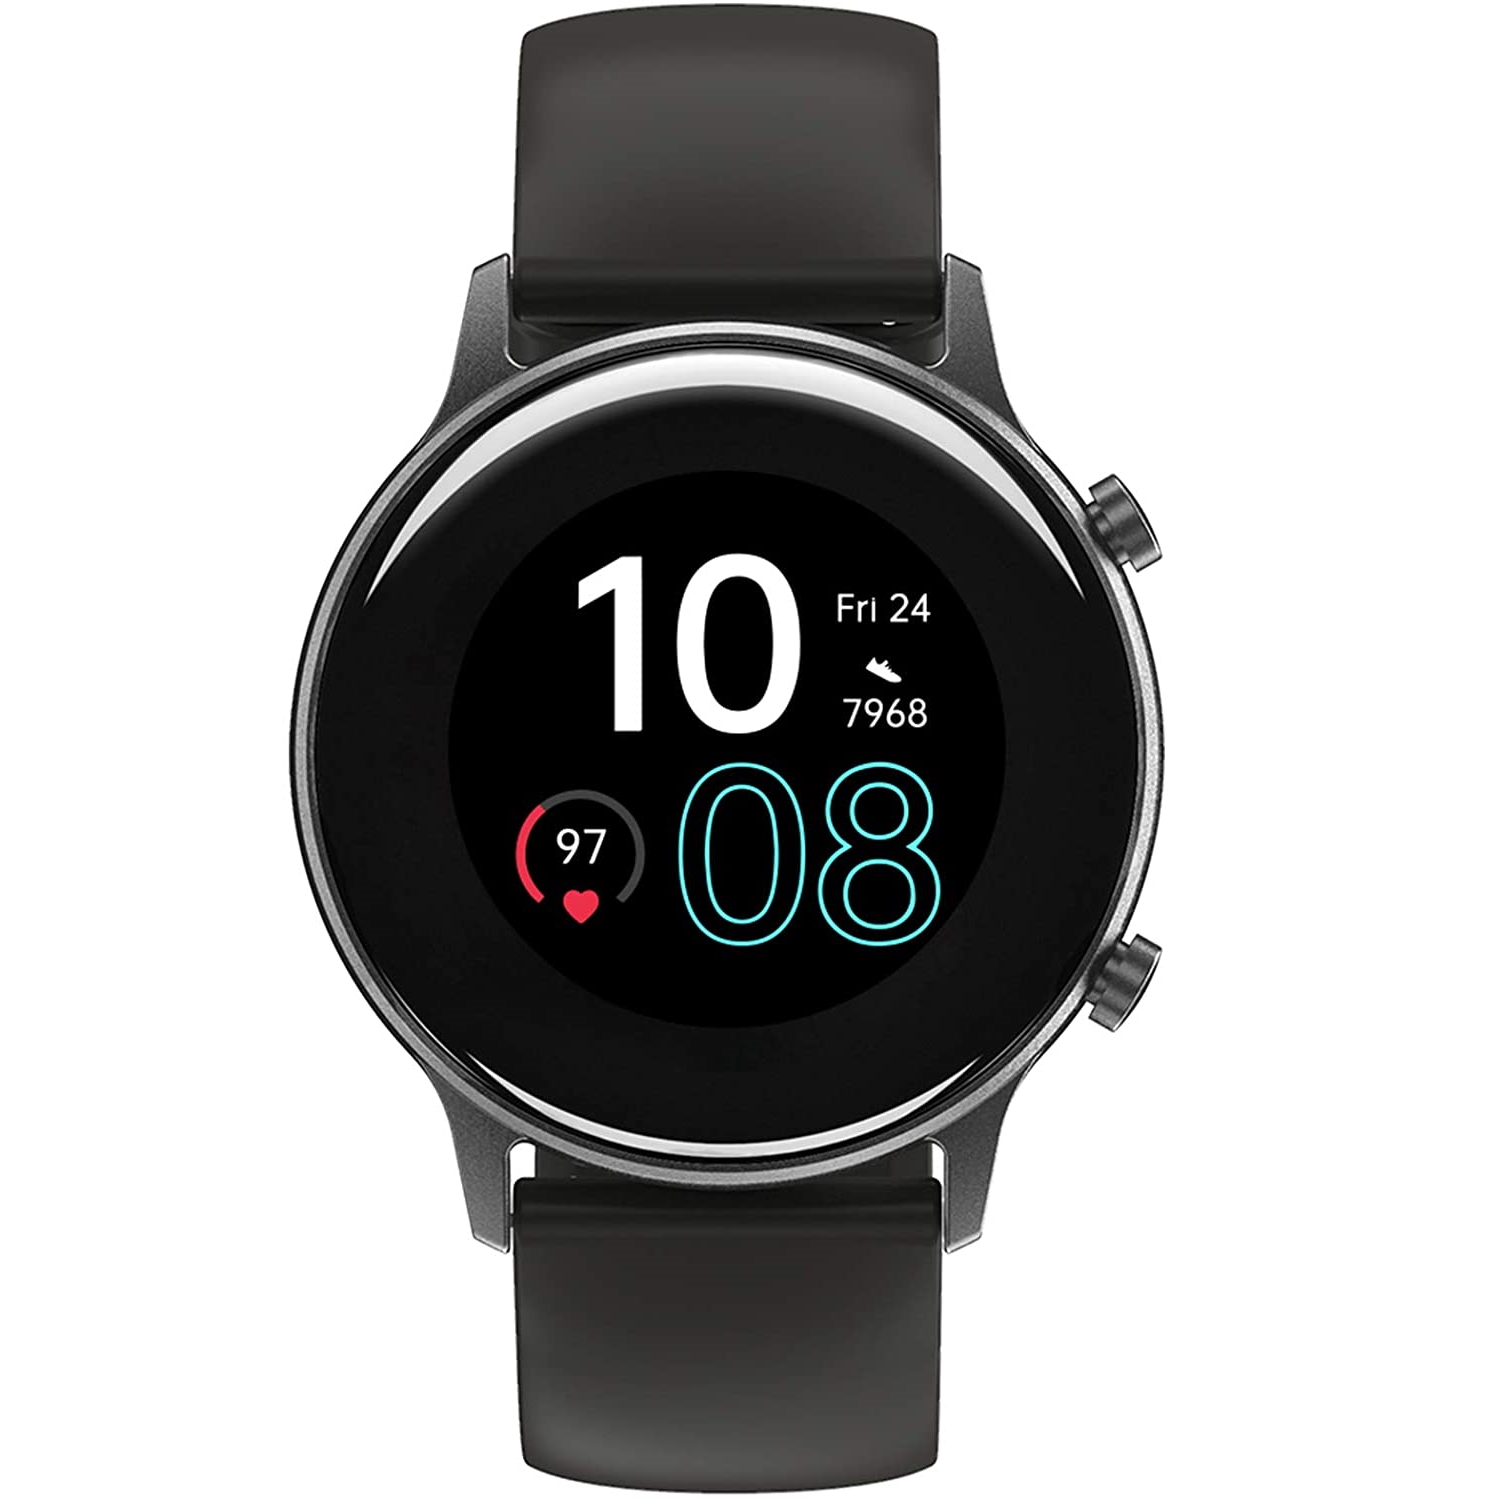 Umidigi Urun: Budget smartwatch with GPS and a 1.1-inch display is